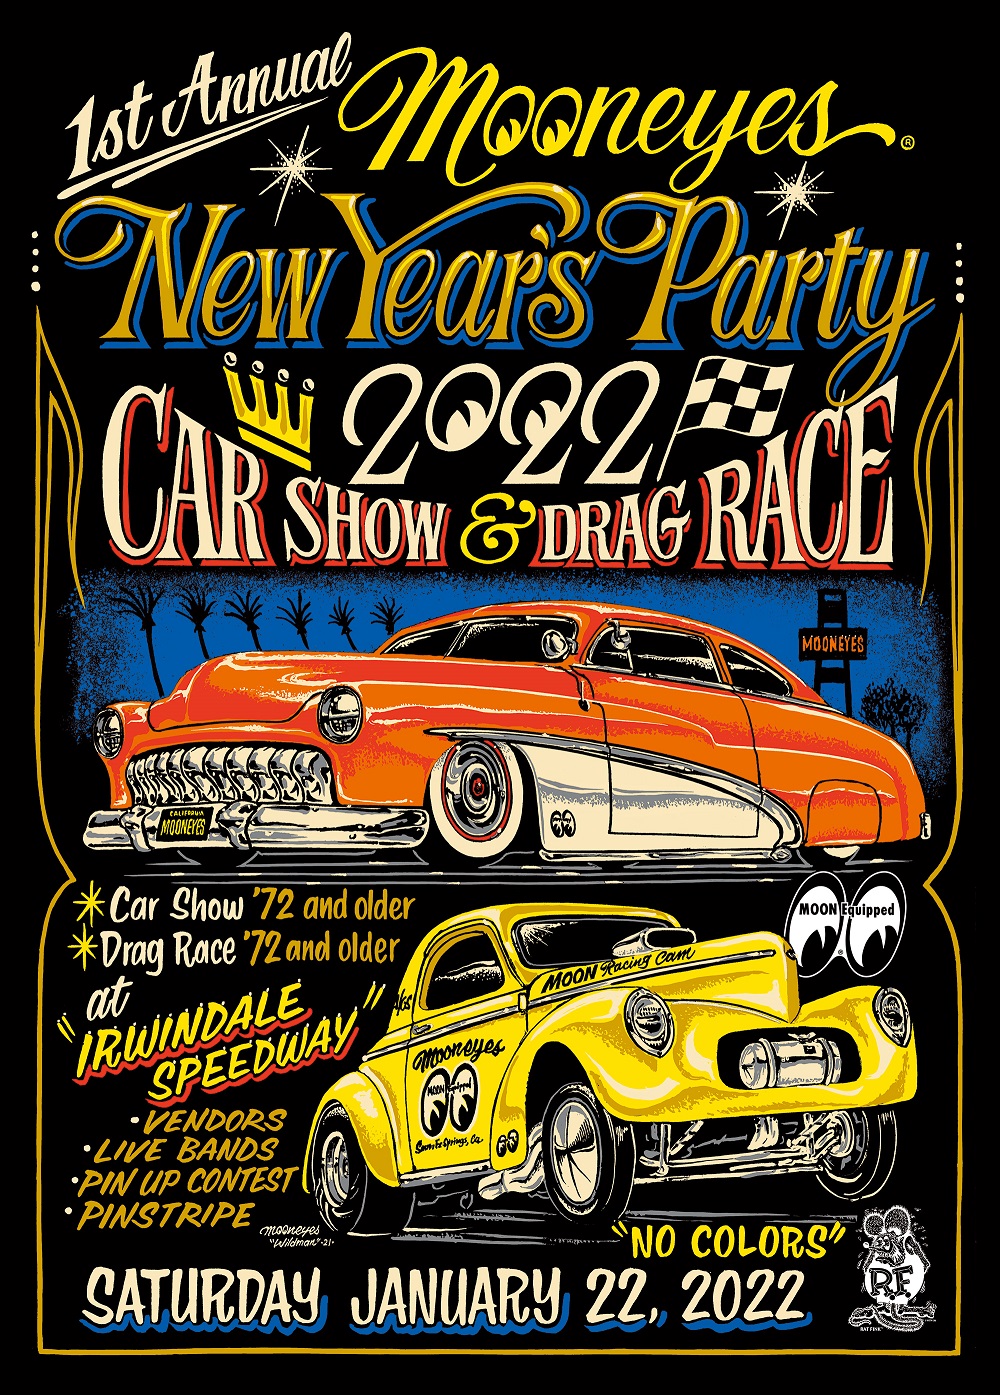 Mooneyes New Year's Party Car Show & Drag Race